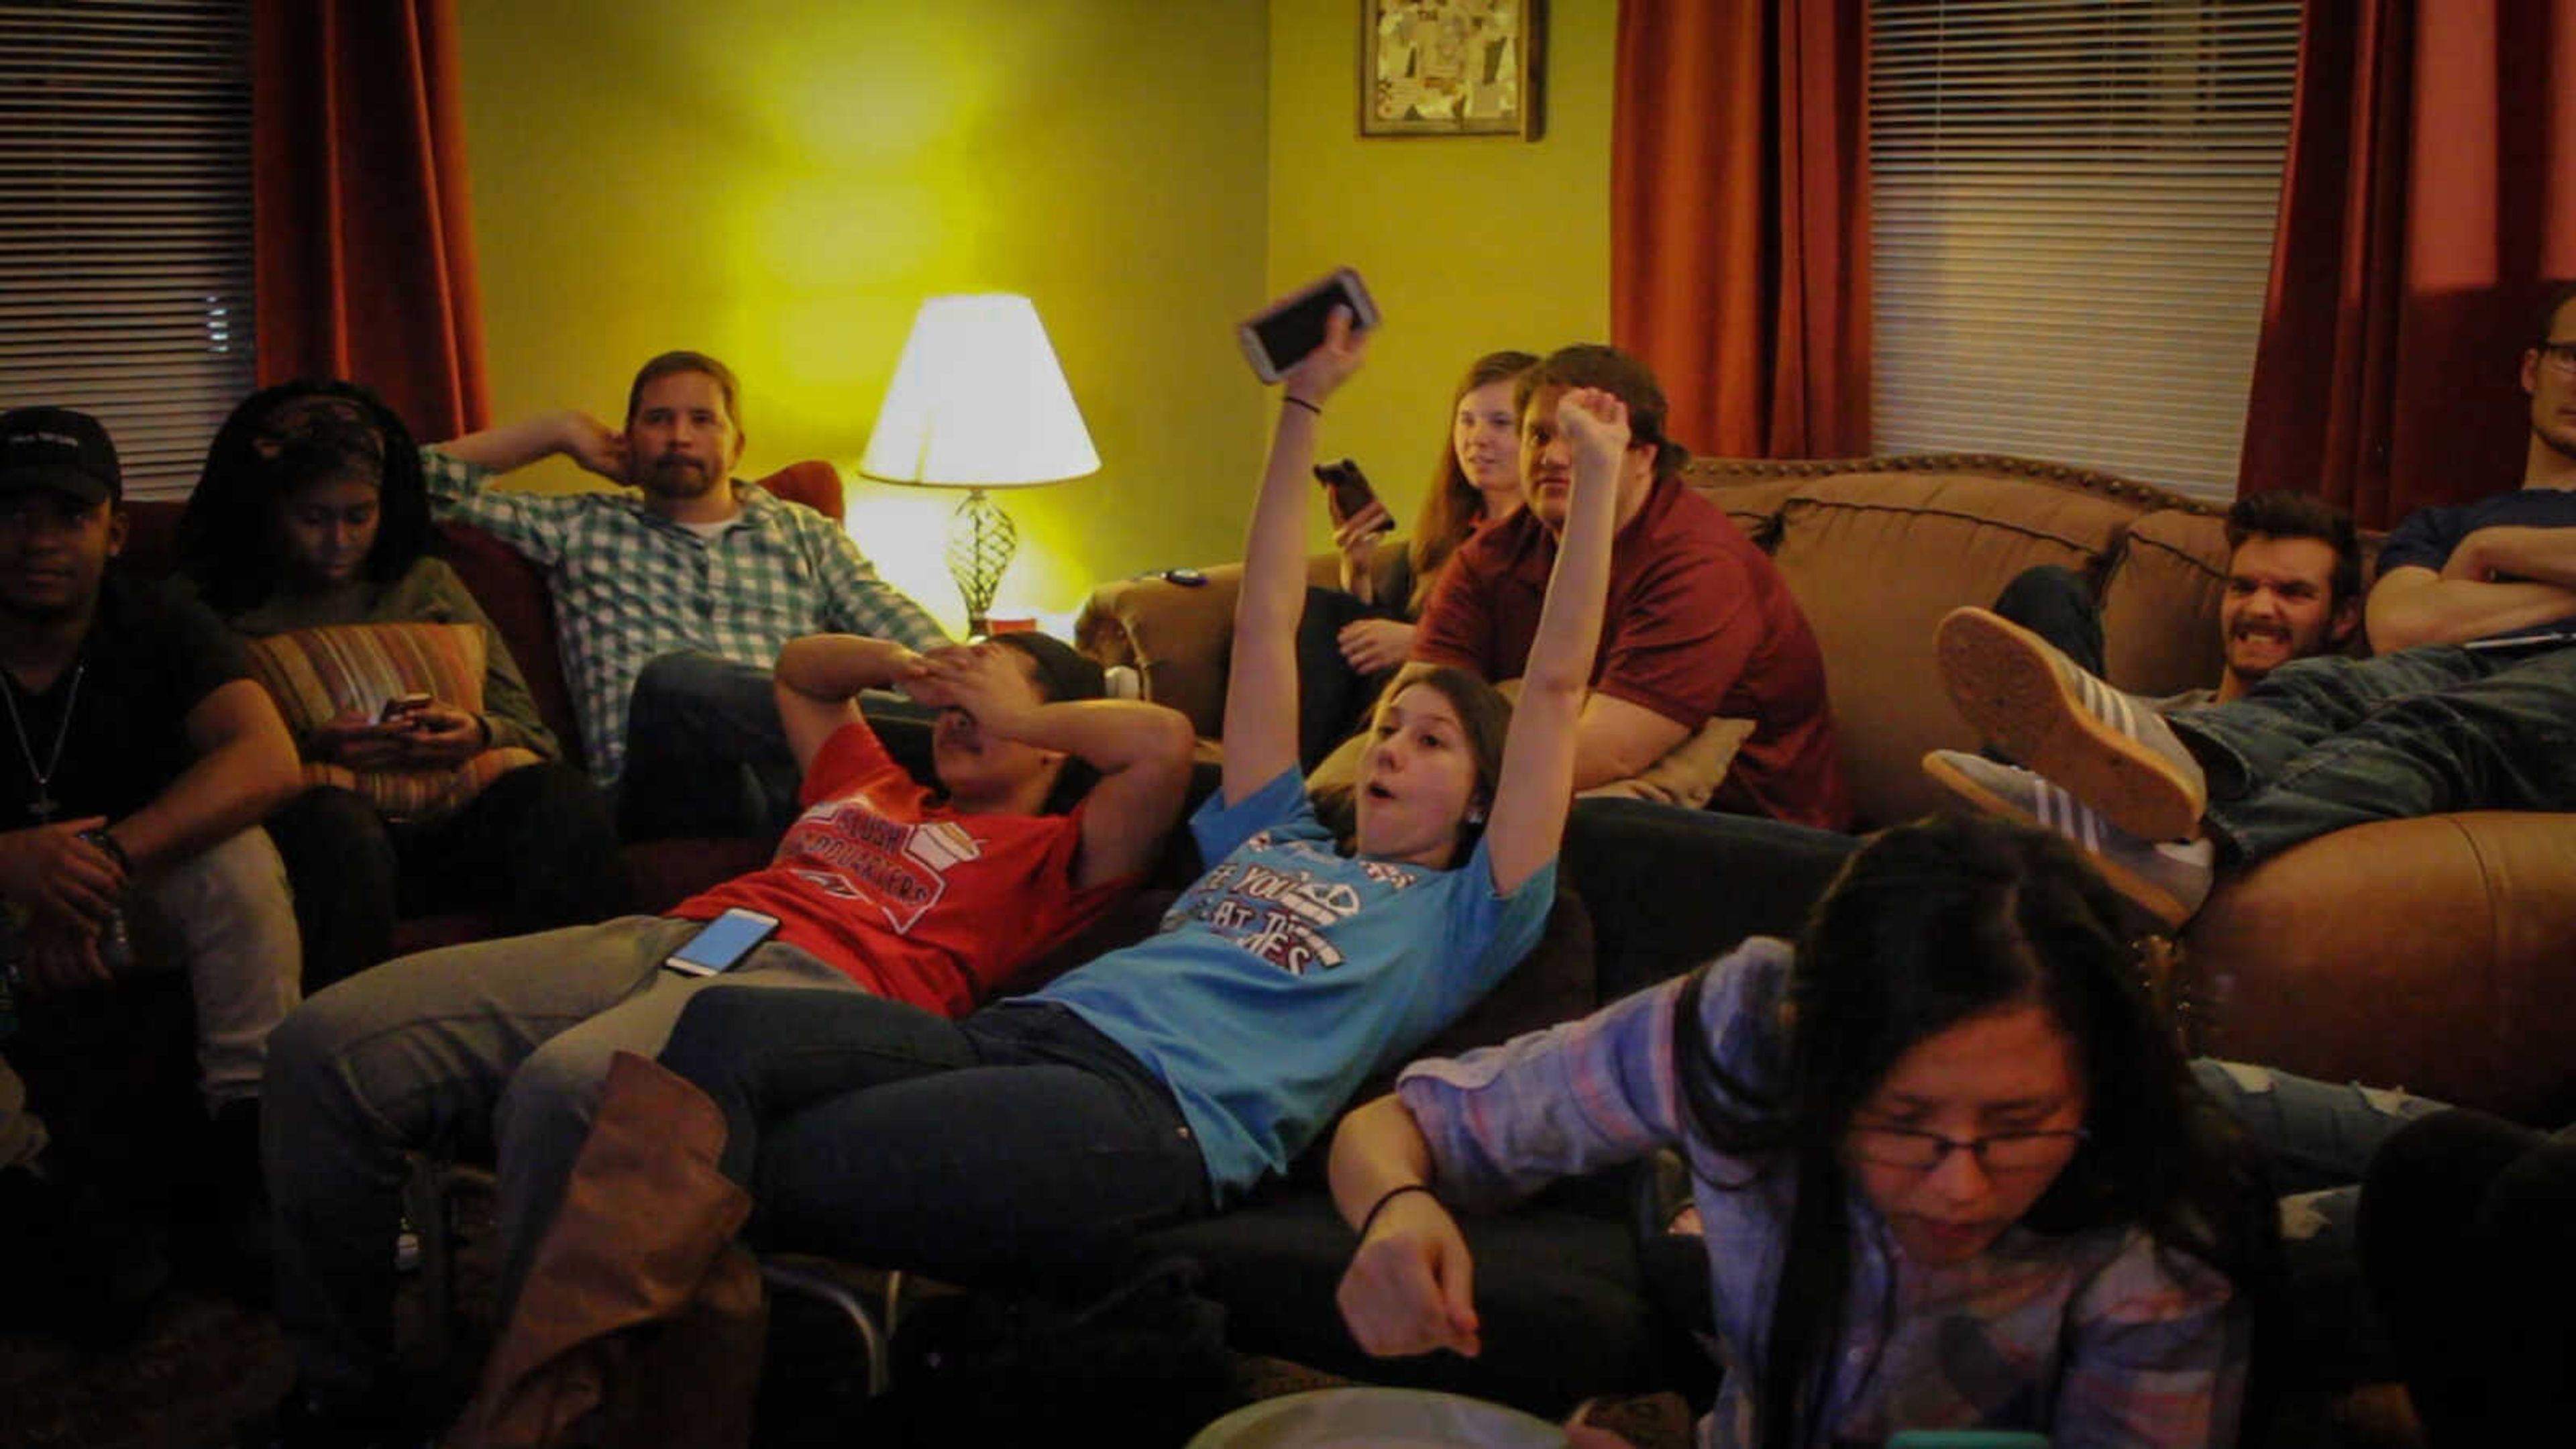 Students at the Ignite House celebrate during the Super Bowl.